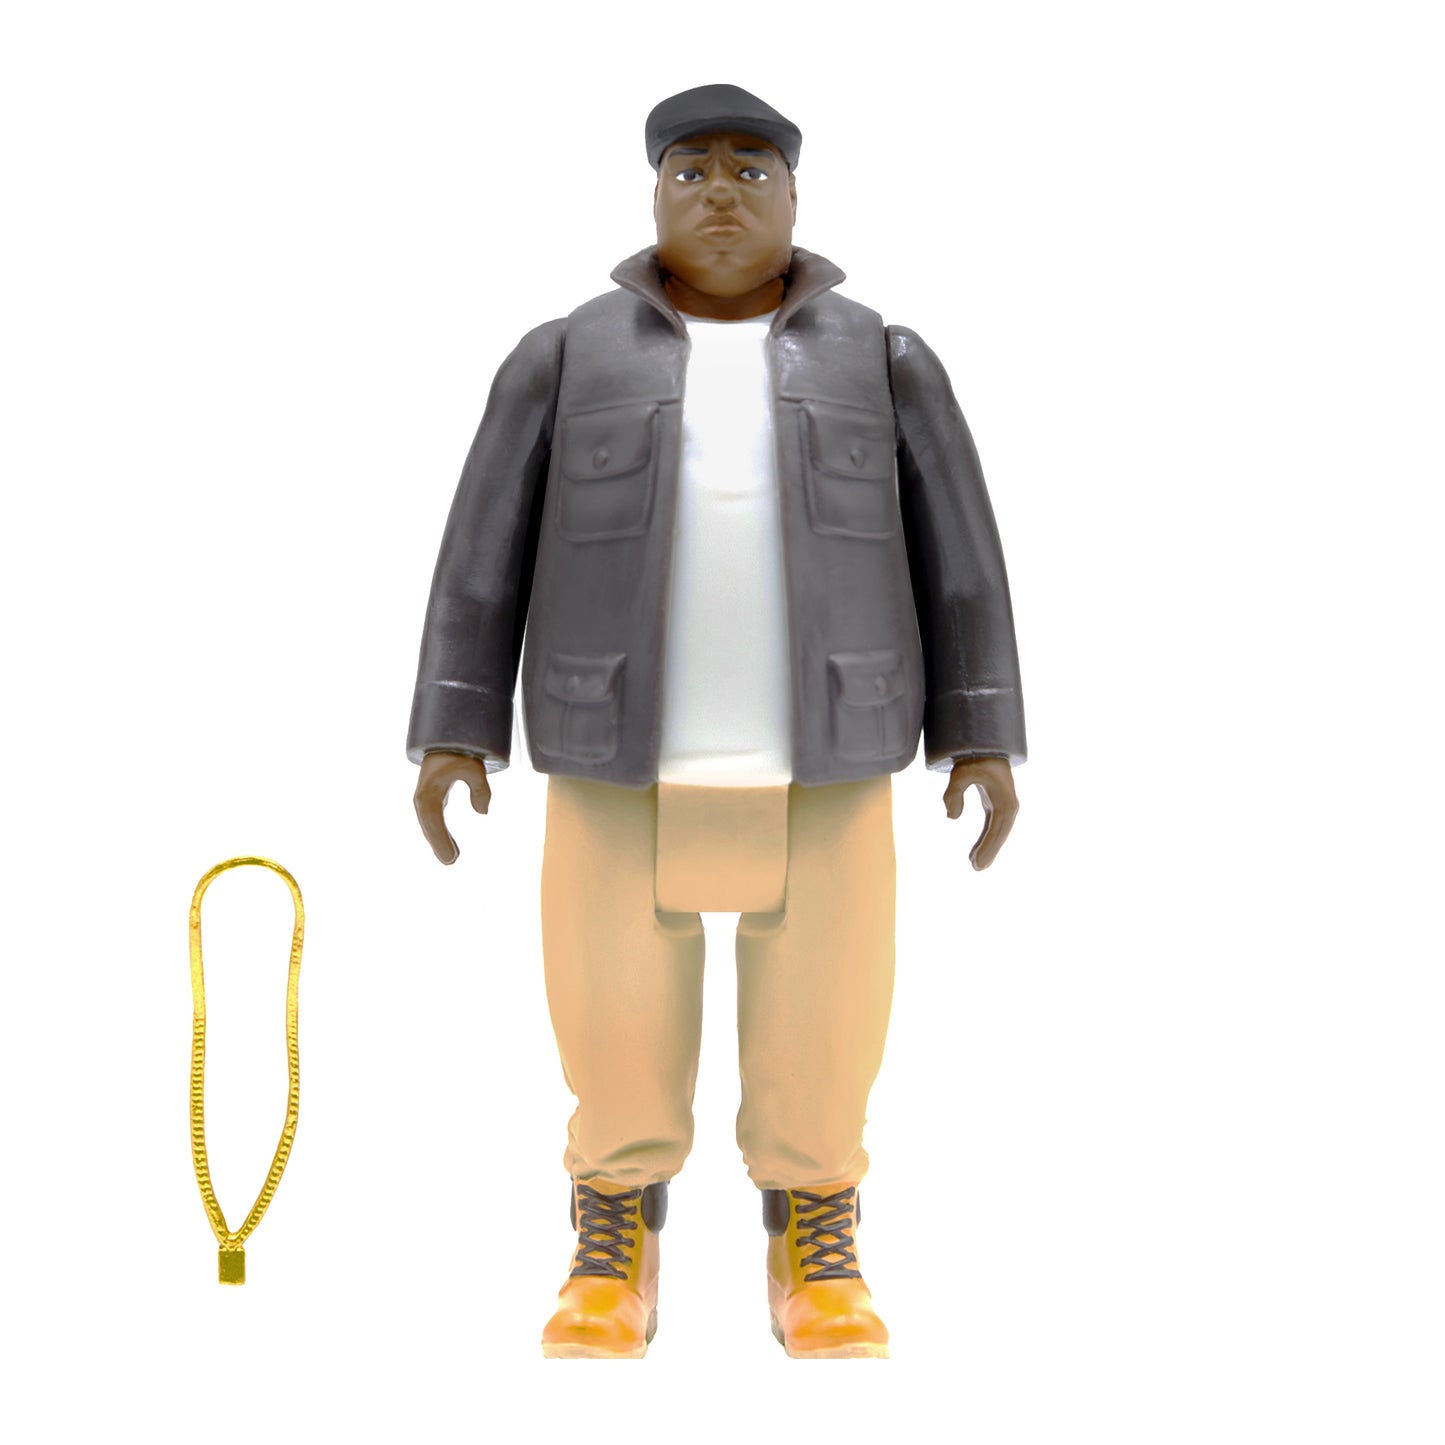 Notorious B.I.G. ReAction Figure